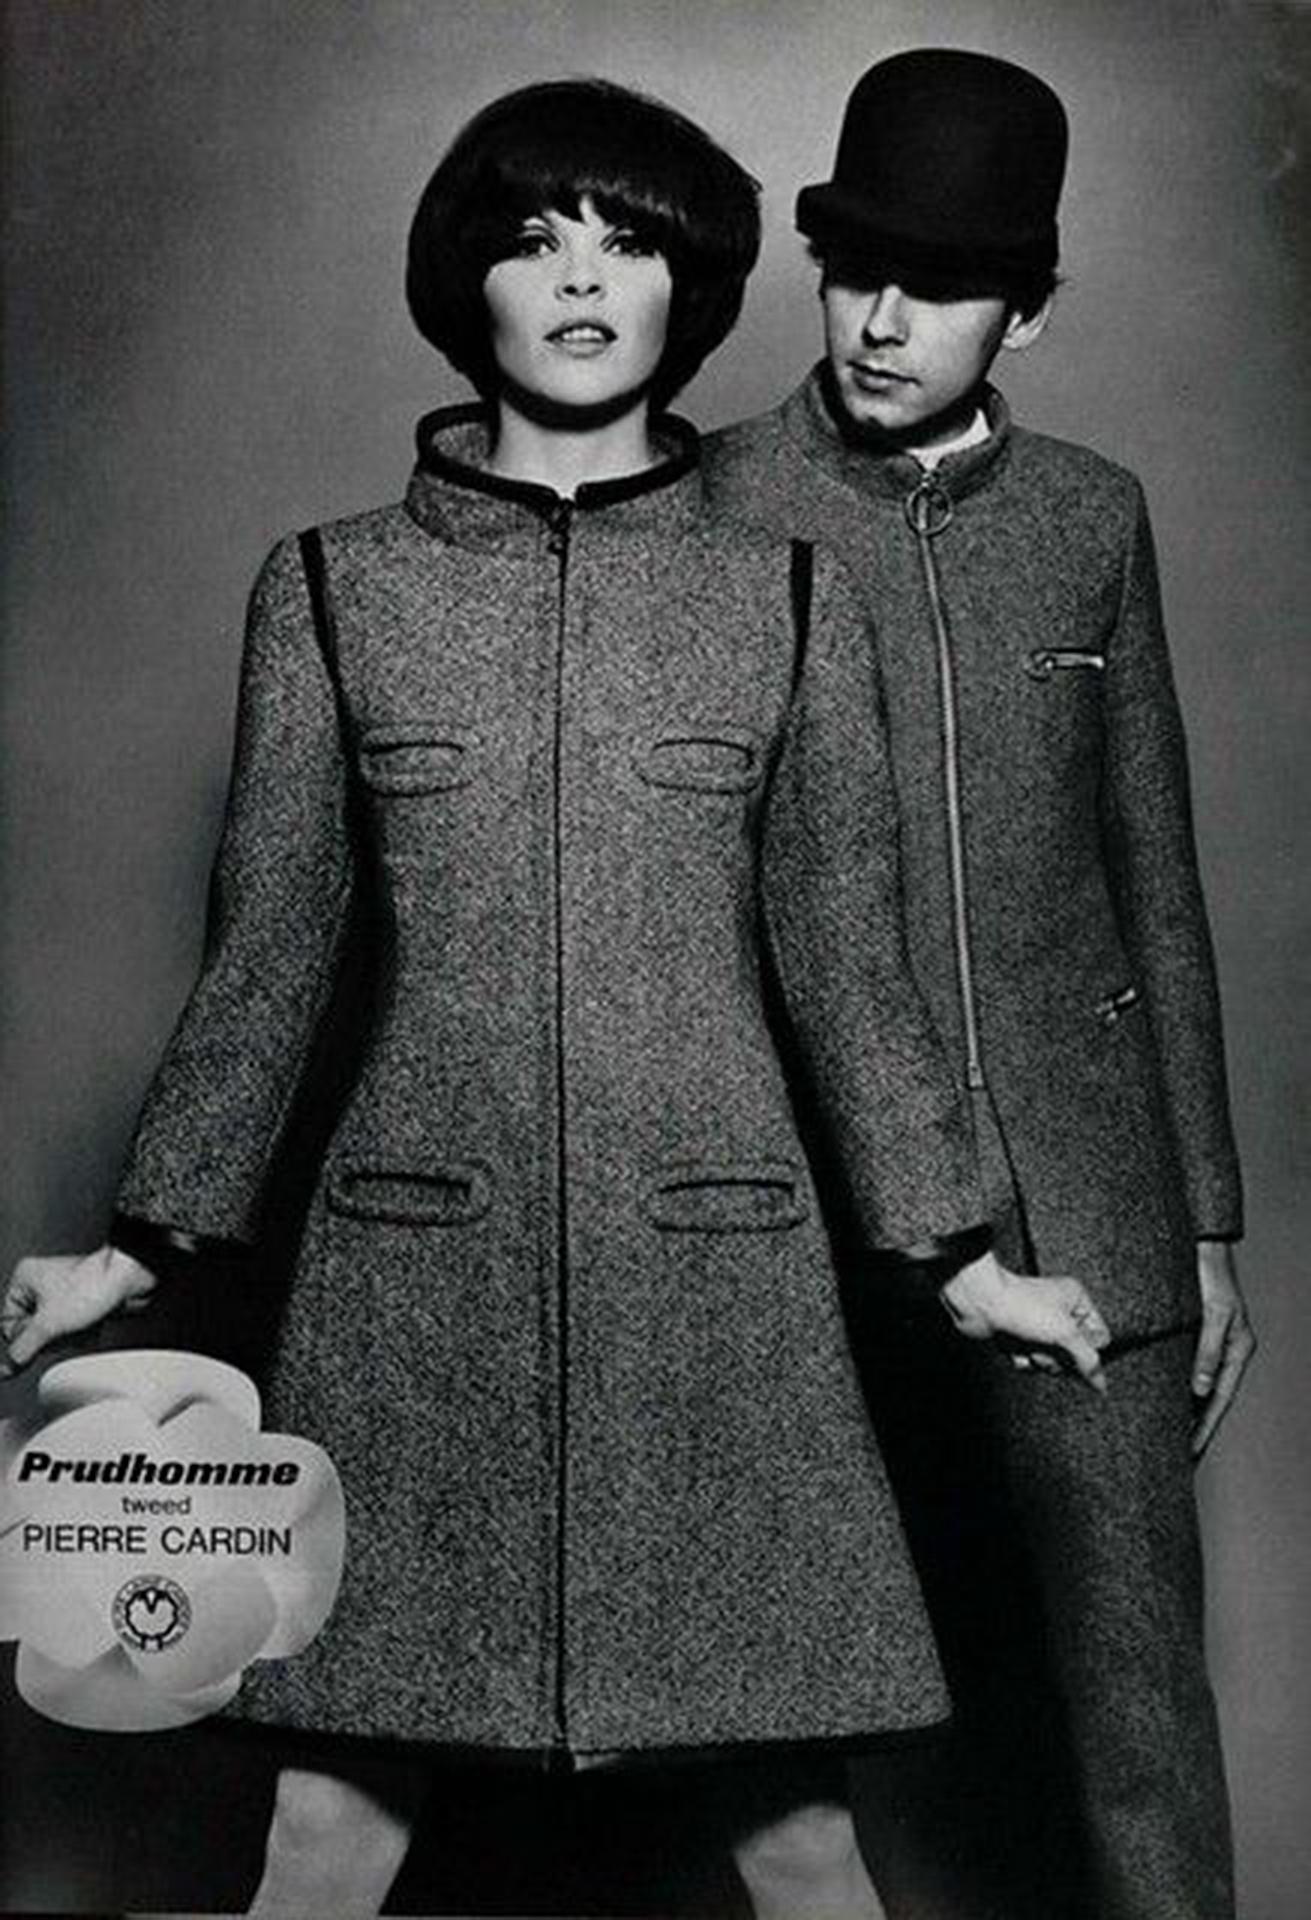 A marvelous Pierre Cardin documented vinyl coated tweed mod trench jacket dating back to his beloved 1968 collection. In 1951 Cardin opened his own couture house and by 1957, he started a ready-to-wear line; a bold move for a French couturier at the